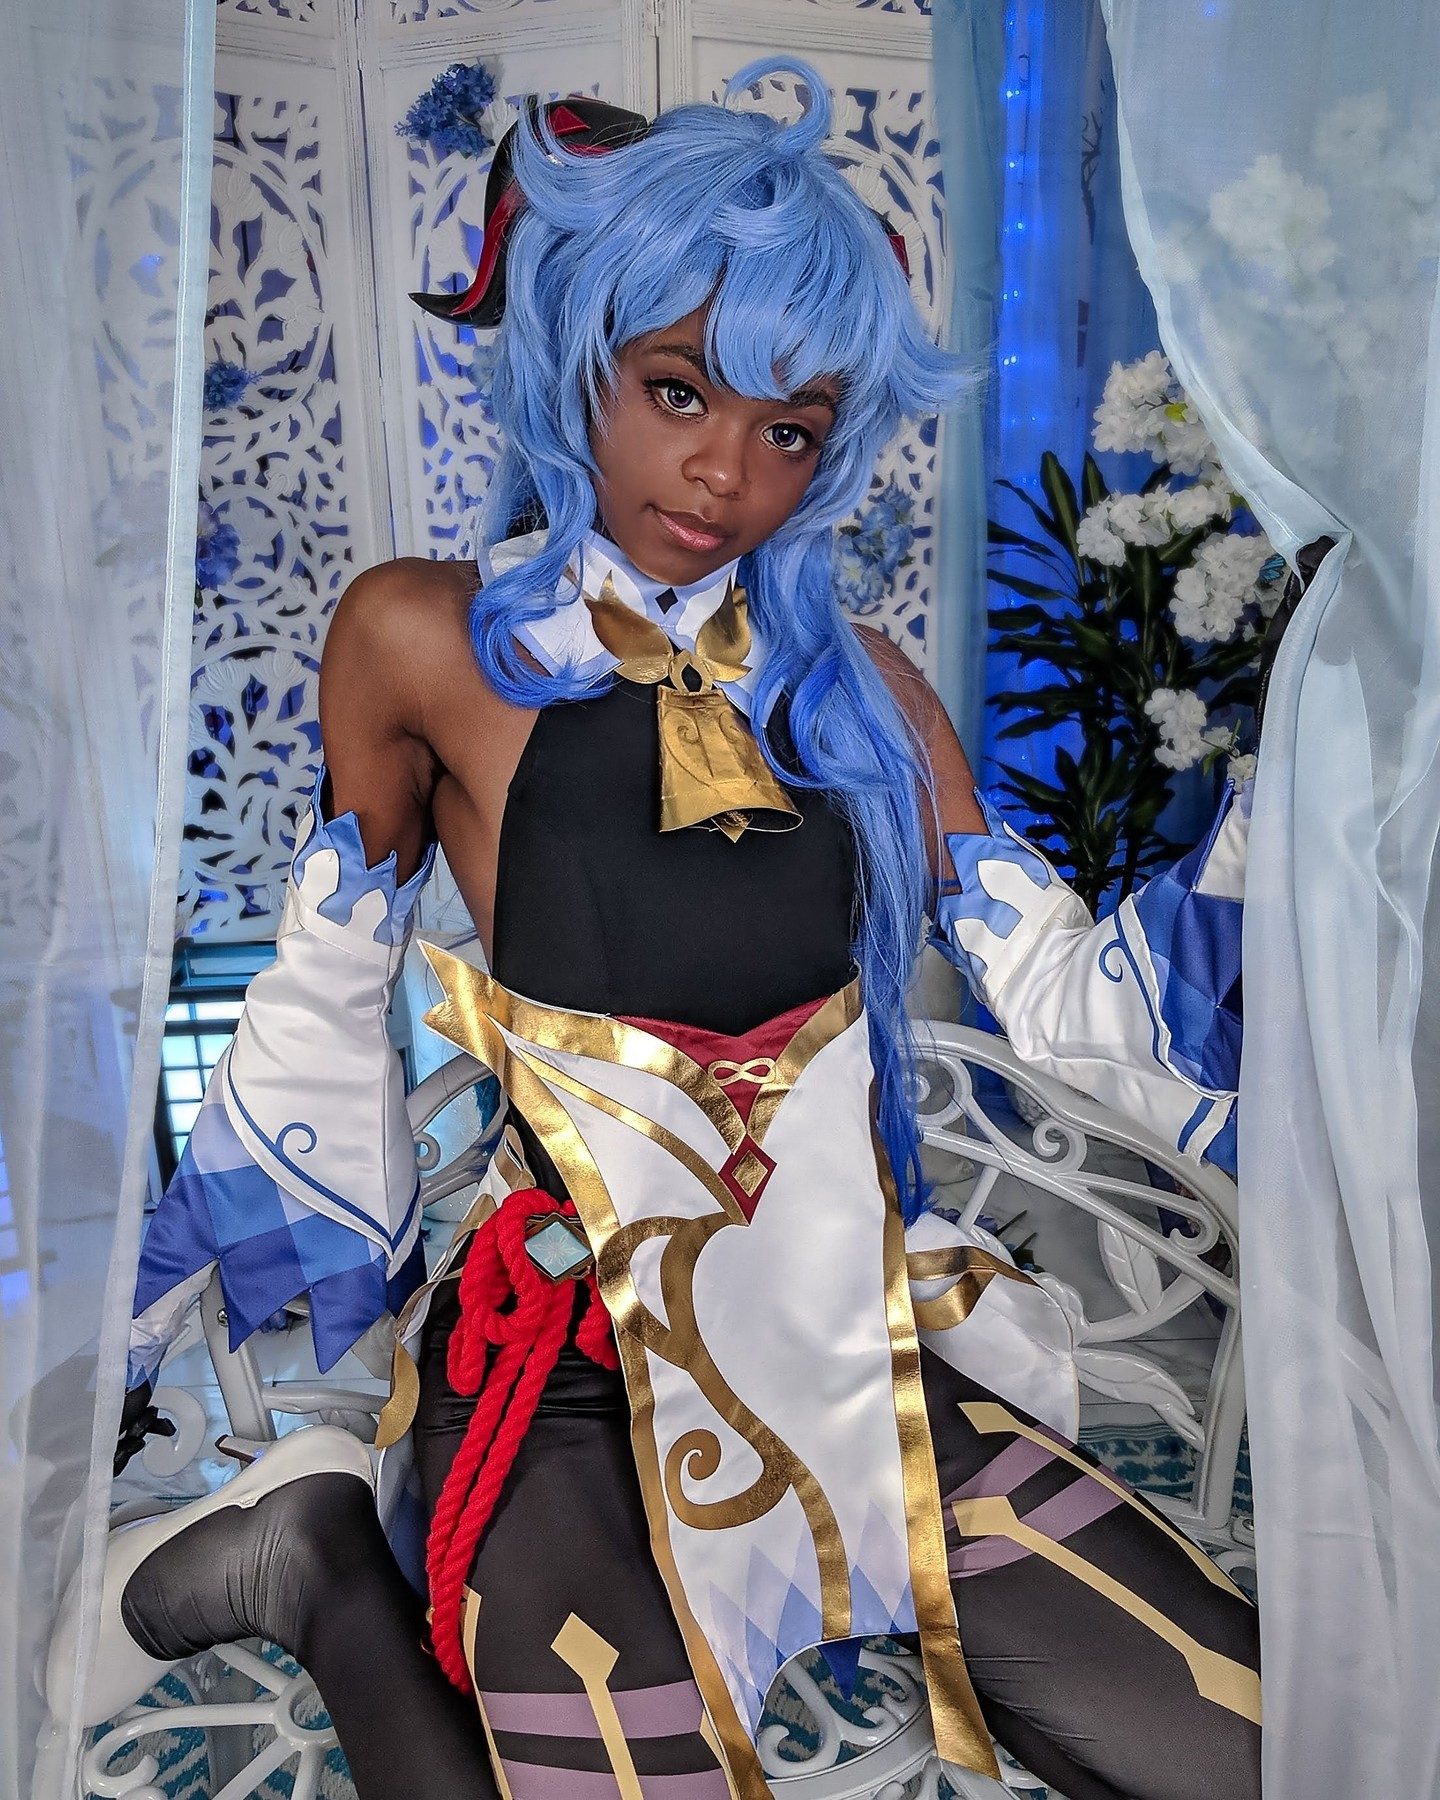 Who is your favorite Genshin girl?
*
*
*
*
#genshinimpact #genshincosplay #ganyu #ganyucosplay #genshinimpactcosplay #cosplay #blackcosplayer #animegirl #animecosplay #cosplay #cosplaygirl #blackgirl #blackcosplaygirl